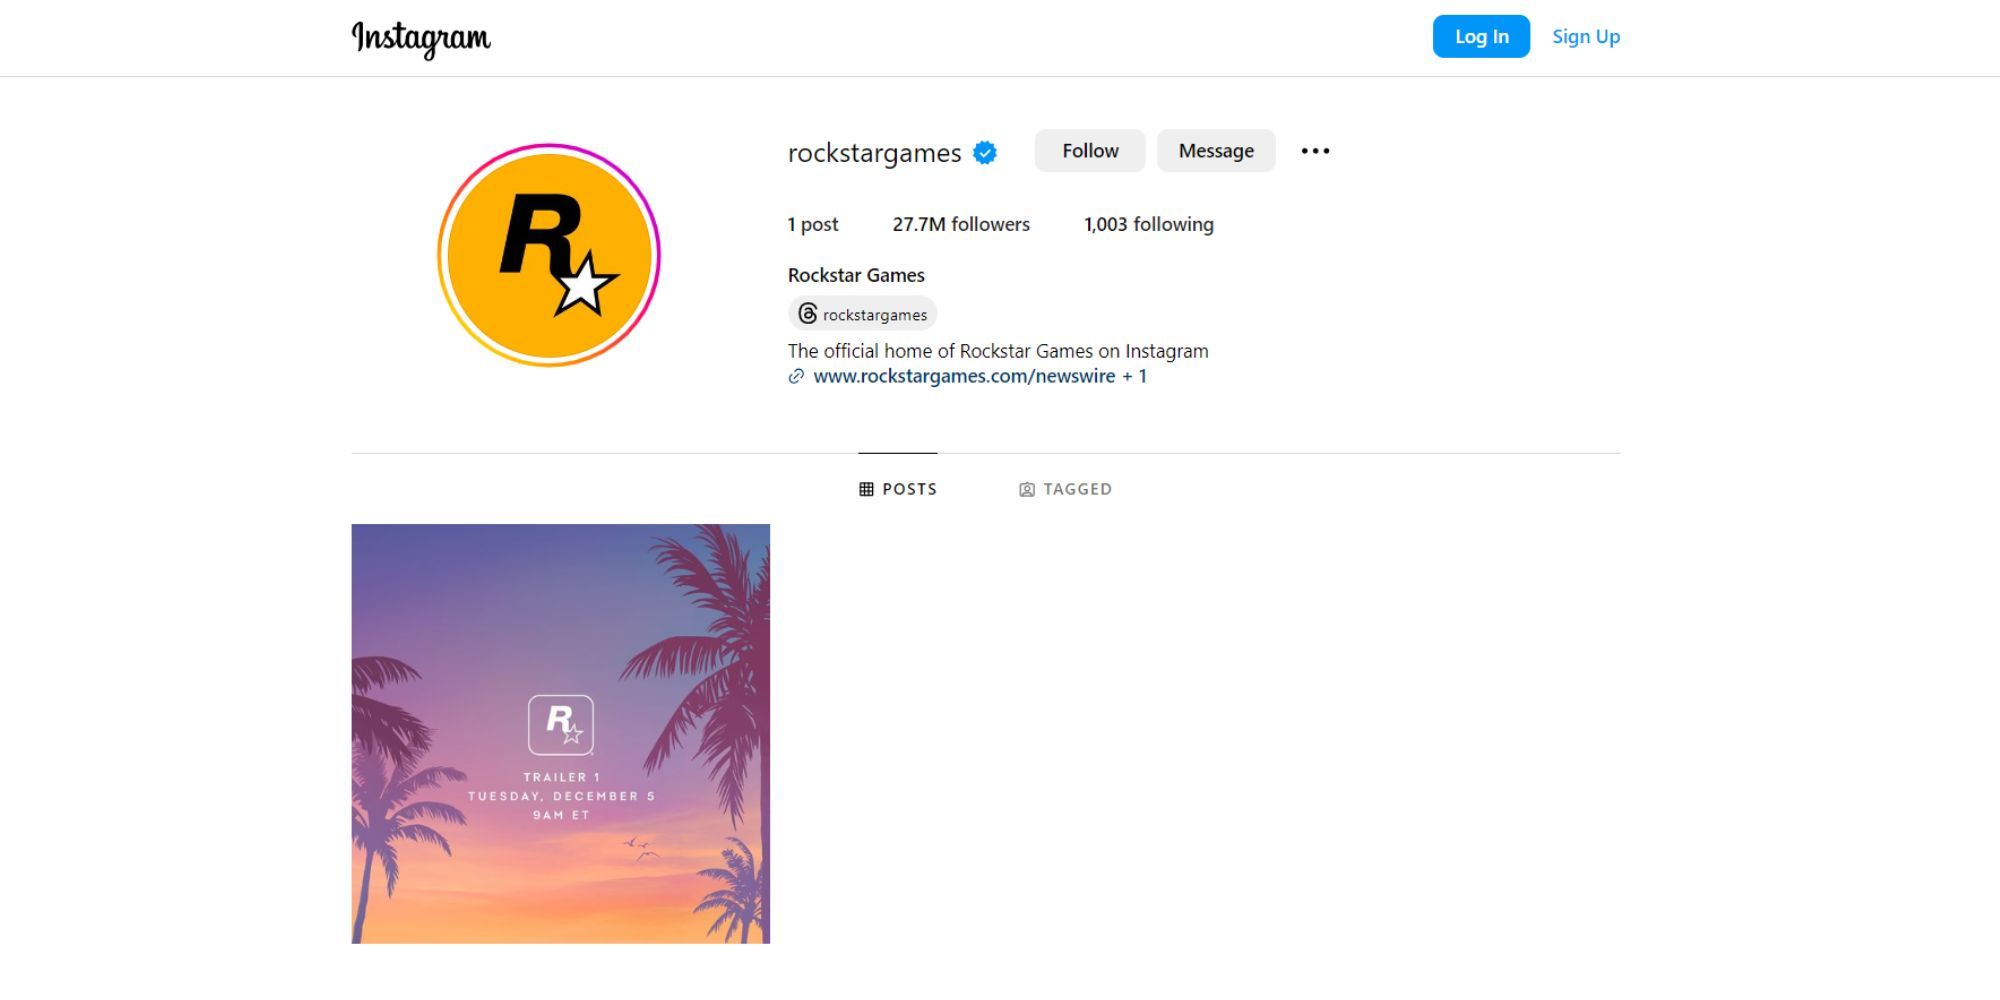 A screenshot from Rockstar's Instagram page, showing all posts are deleted except for one